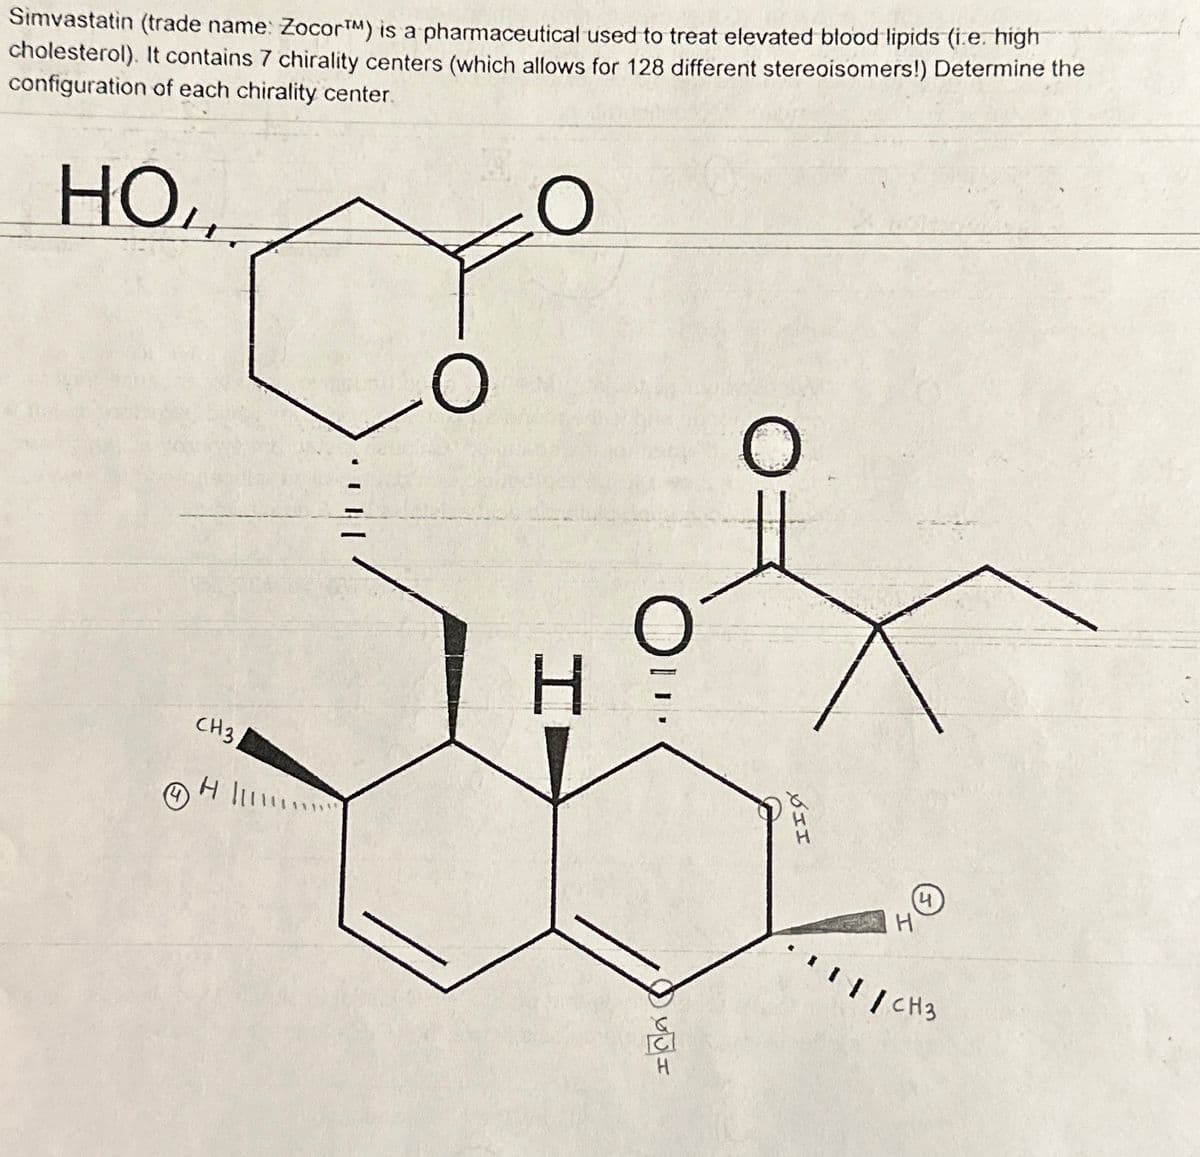 Simvastatin (trade name: Zocor™M) is a pharmaceutical used to treat elevated blood lipids (i.e. high
cholesterol). It contains 7 chirality centers (which allows for 128 different stereoisomers!) Determine the
configuration of each chirality center.
HOL.
O
CH3
H
O
H
Ou
yot
H
O
XII
H
по
/ CH3